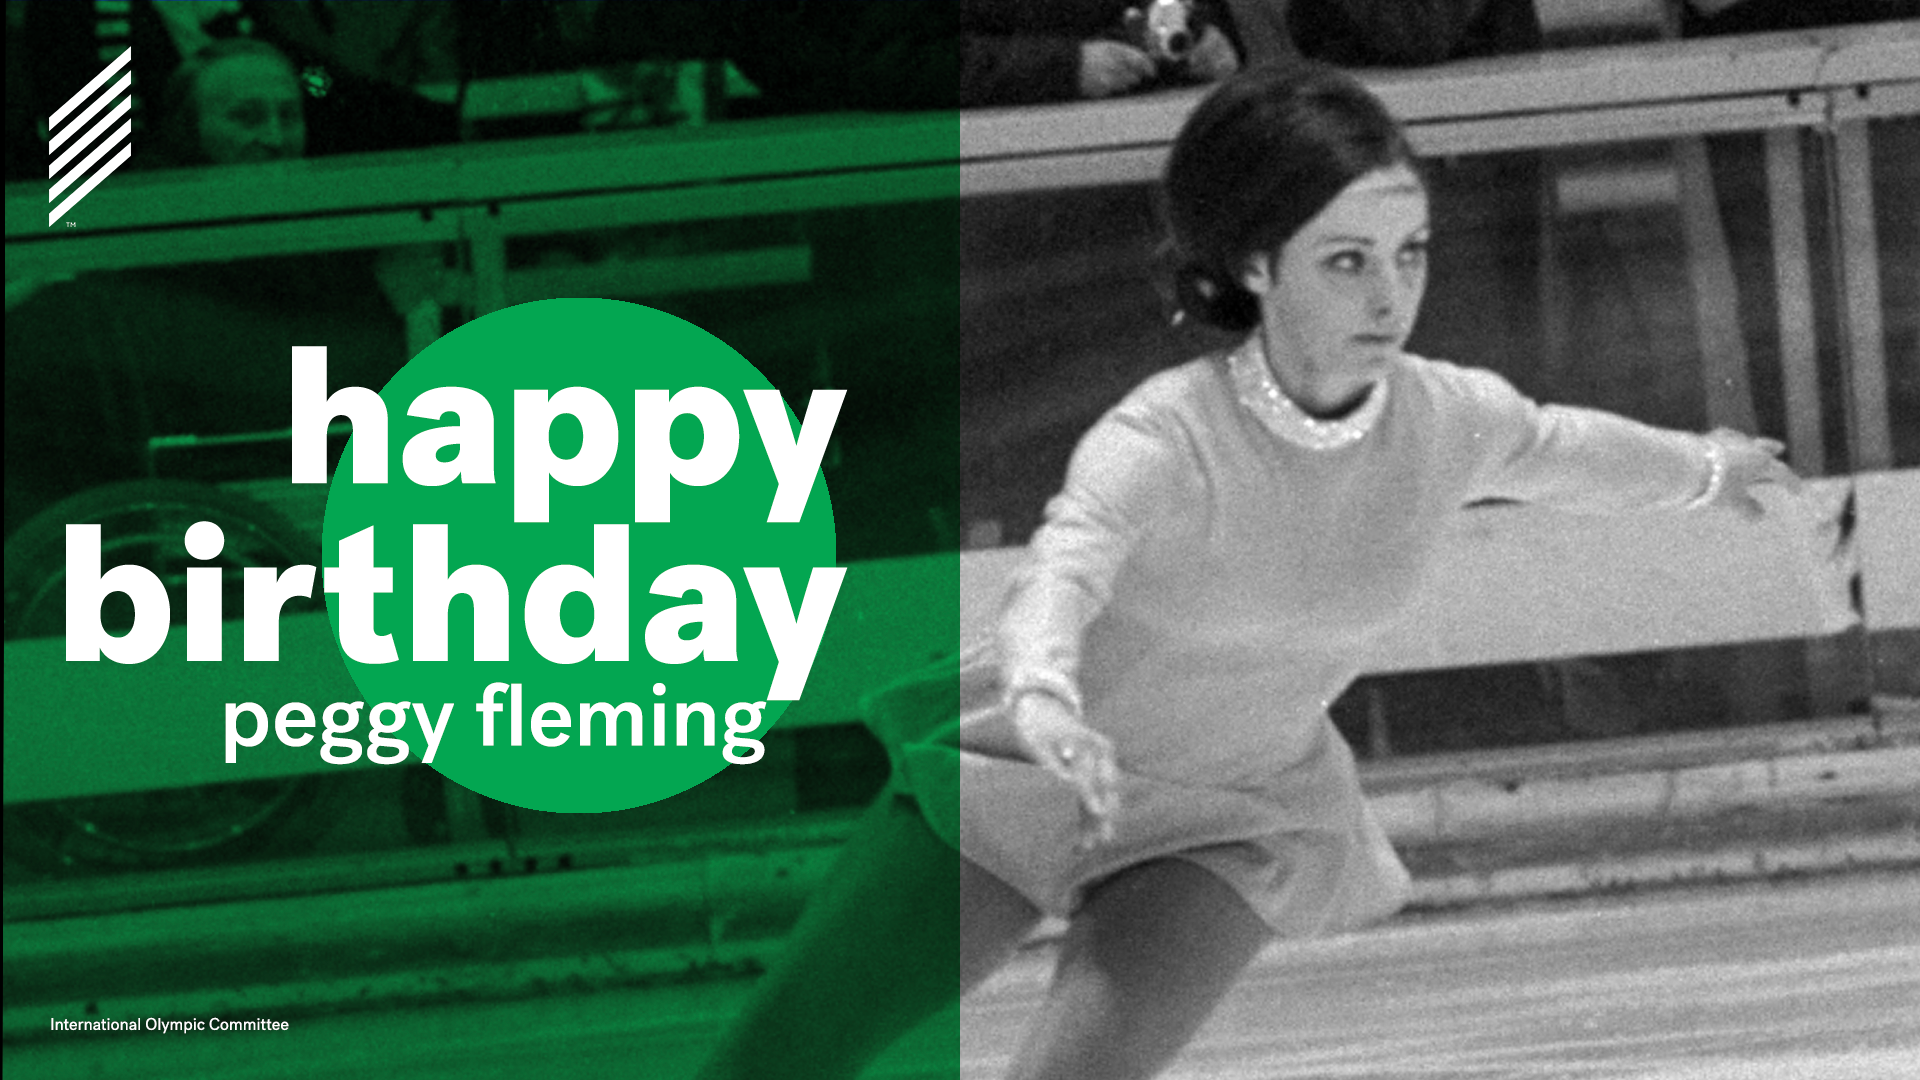 Happy birthday to 1968 Olympic champion, Peggy Fleming: 